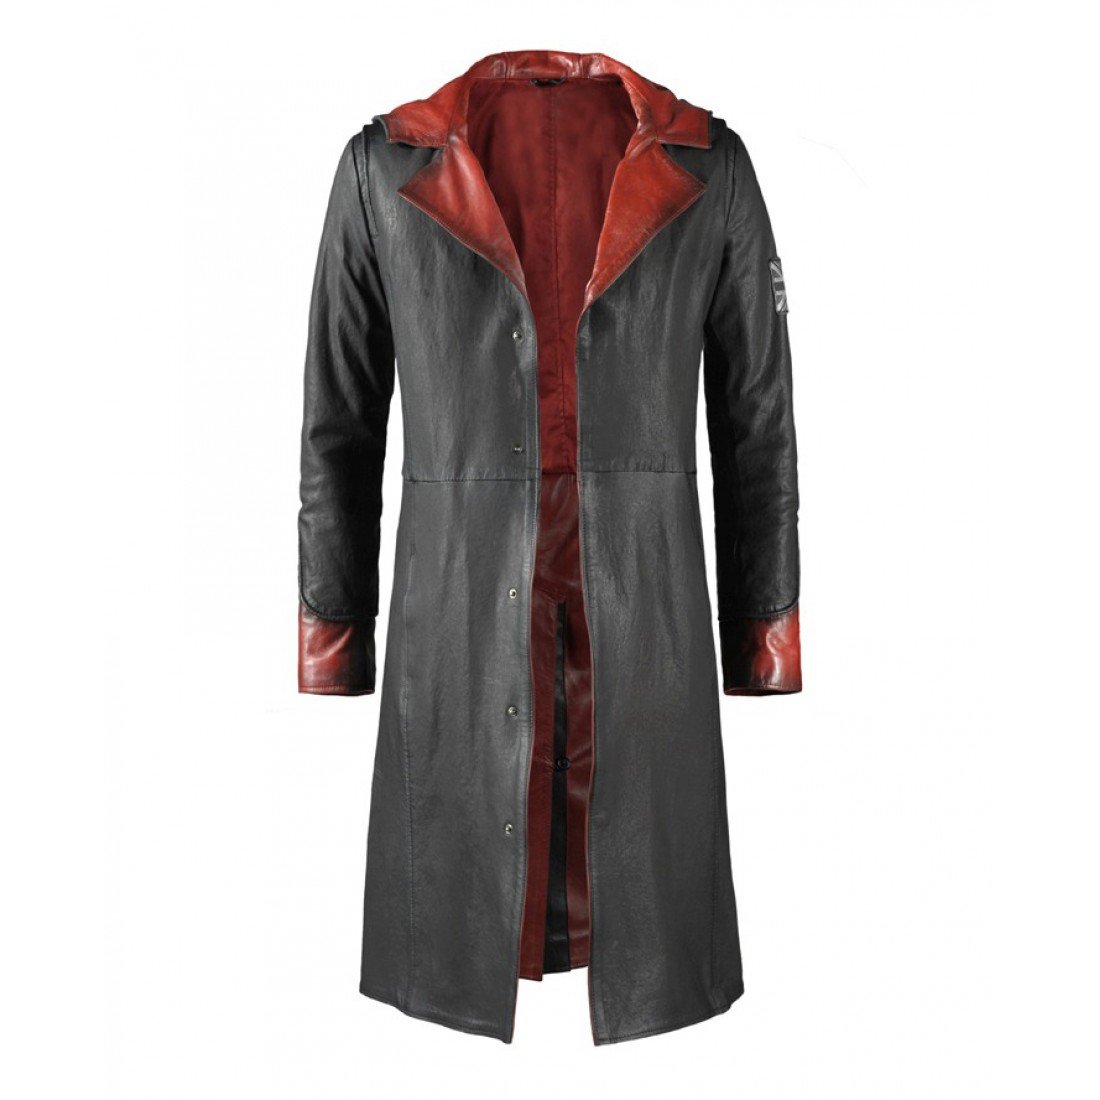 Devil May Cry 5 Dante Leather Trench Coat JacketsThreads.